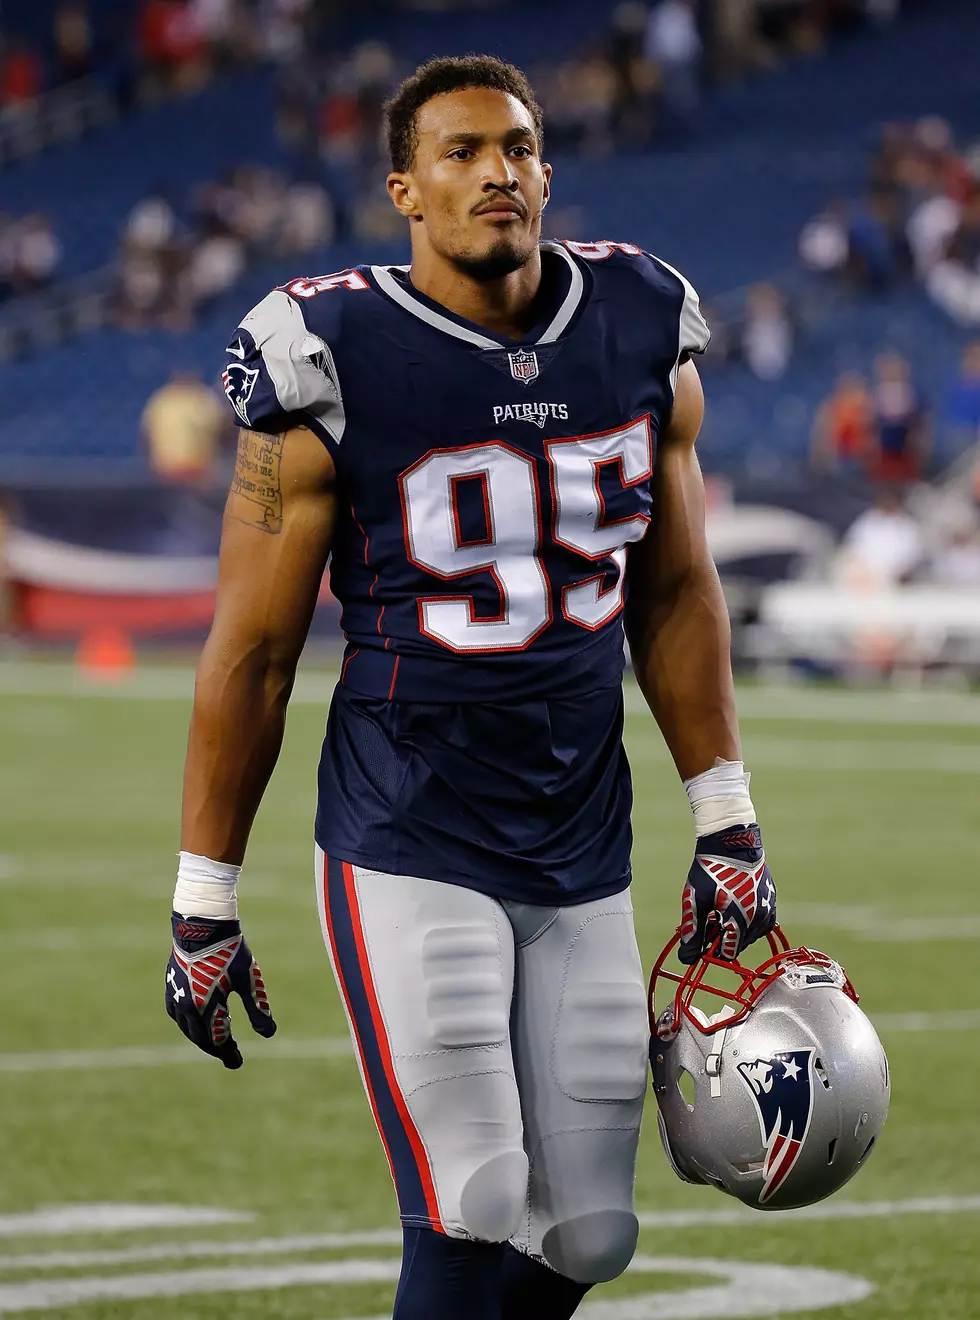 Uh Oh! Is Derek Rivers Out For The Patriots?